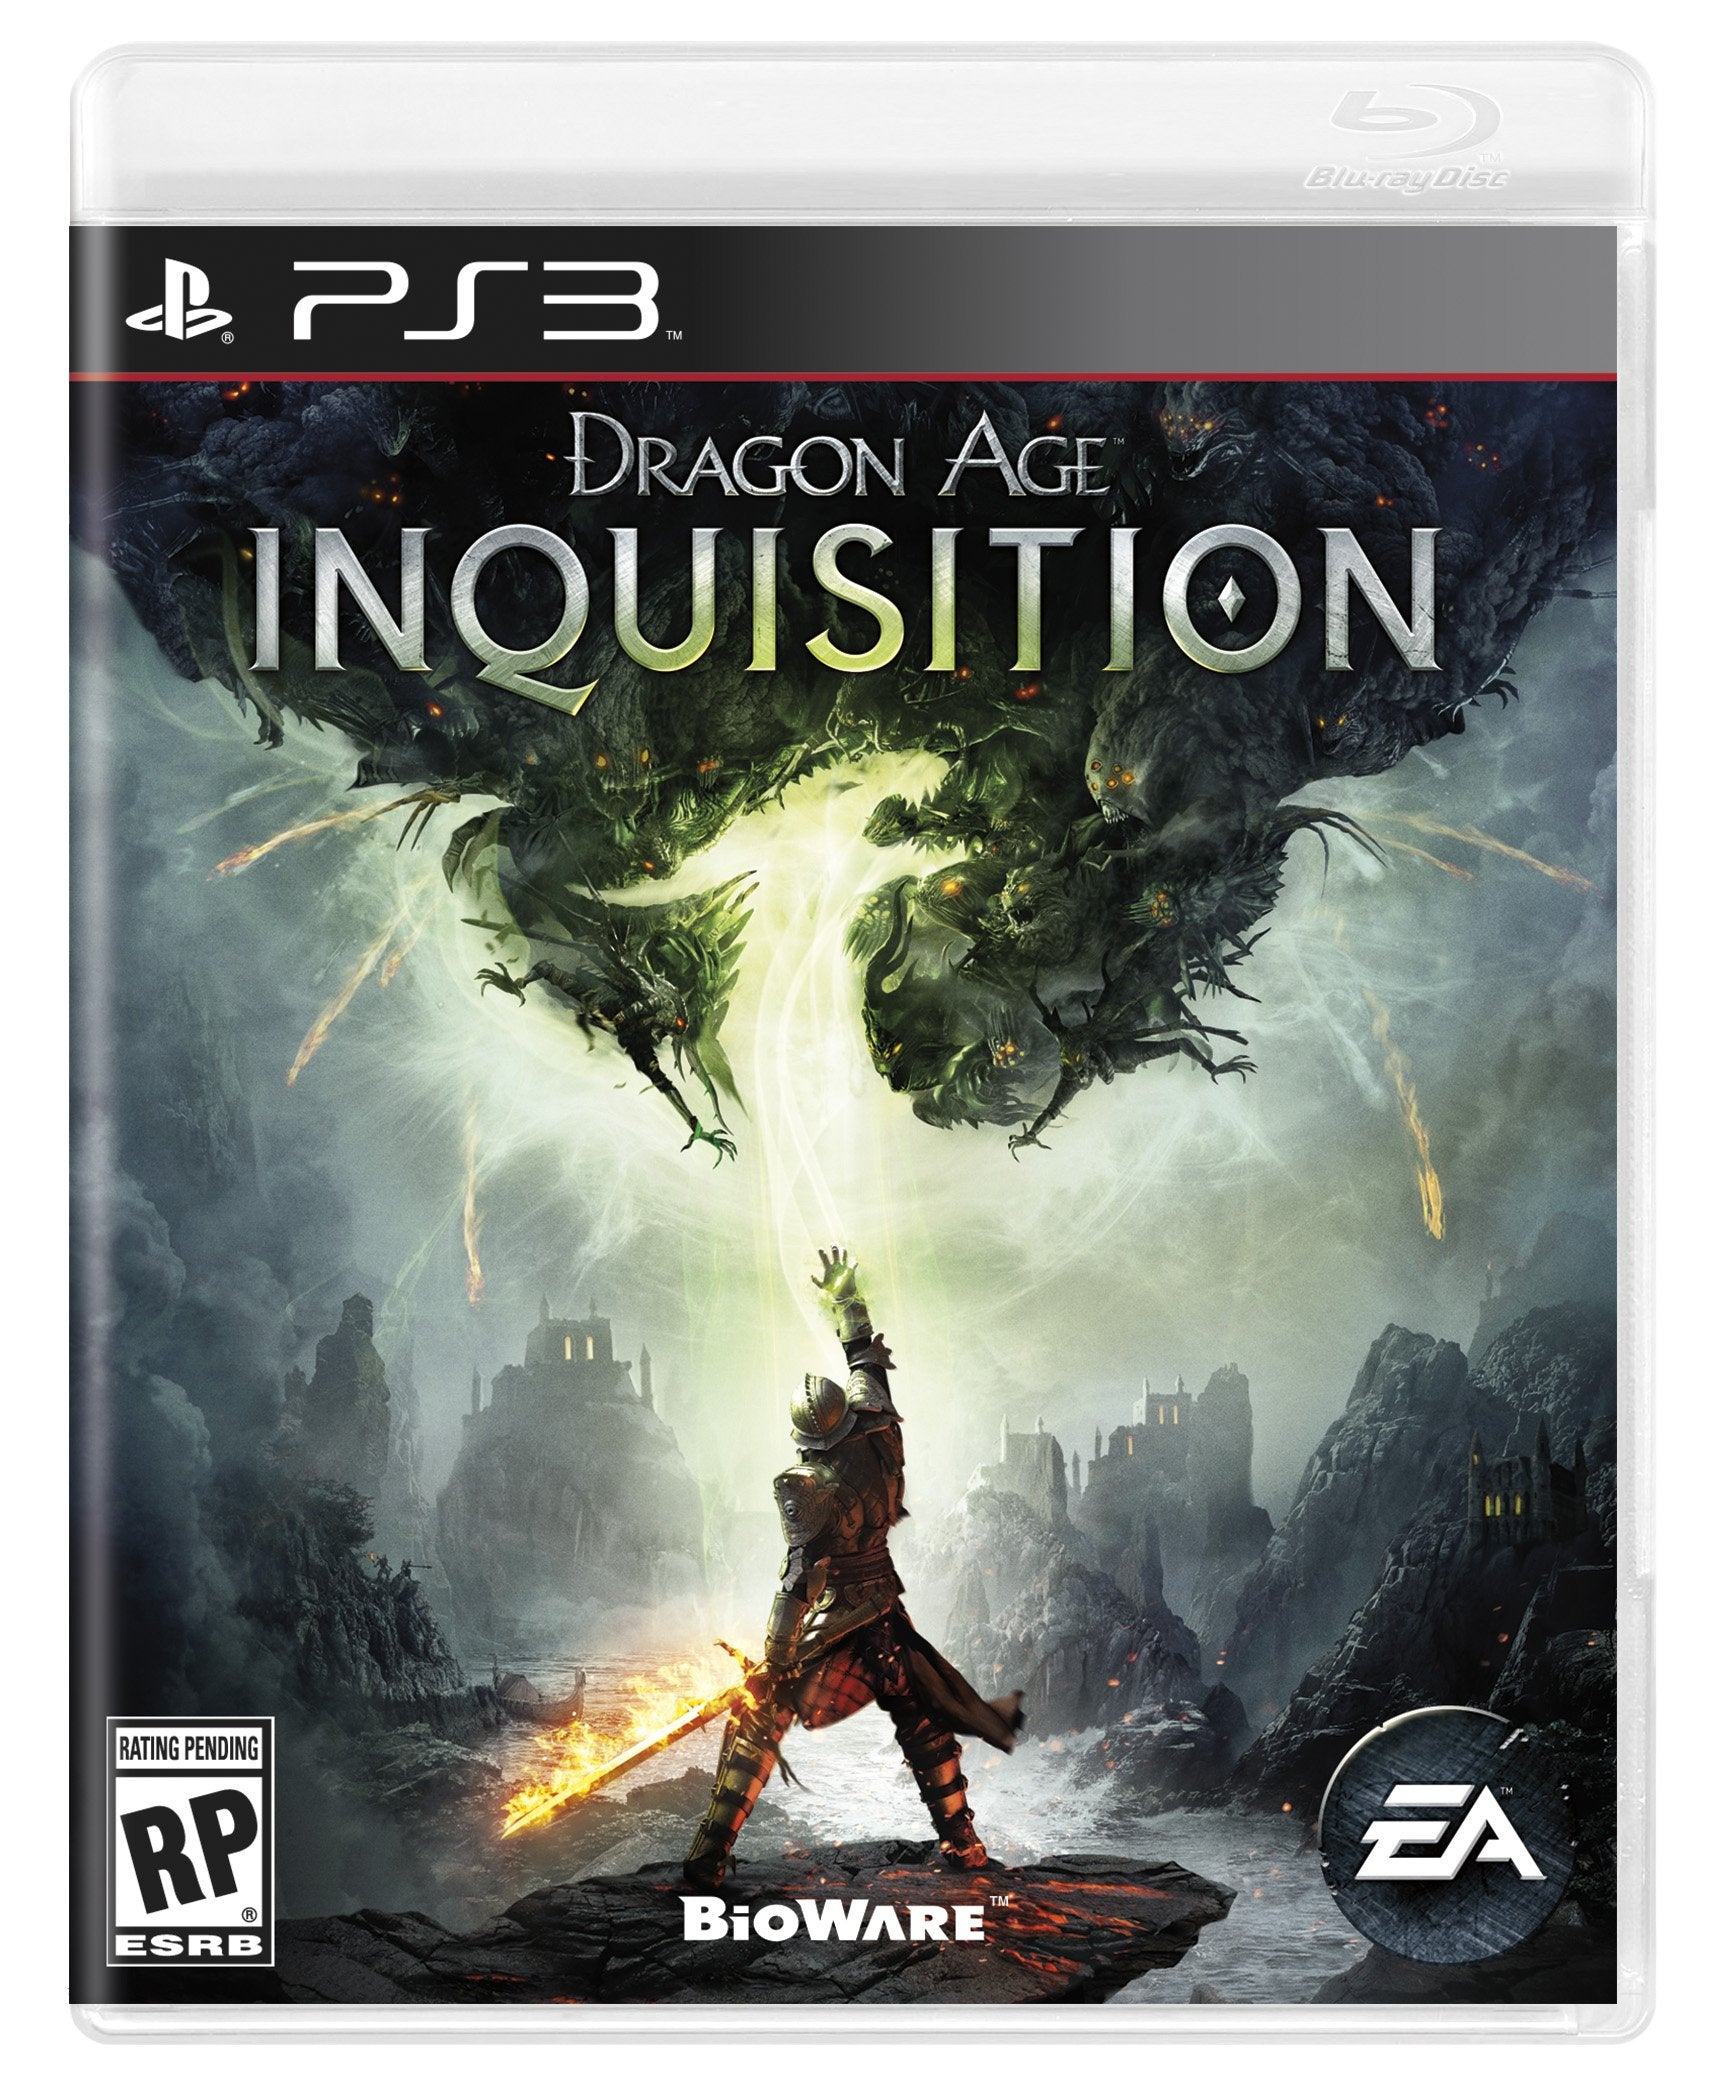 Dragon Age Inquisition - Sony PlayStation 3 (PS3)